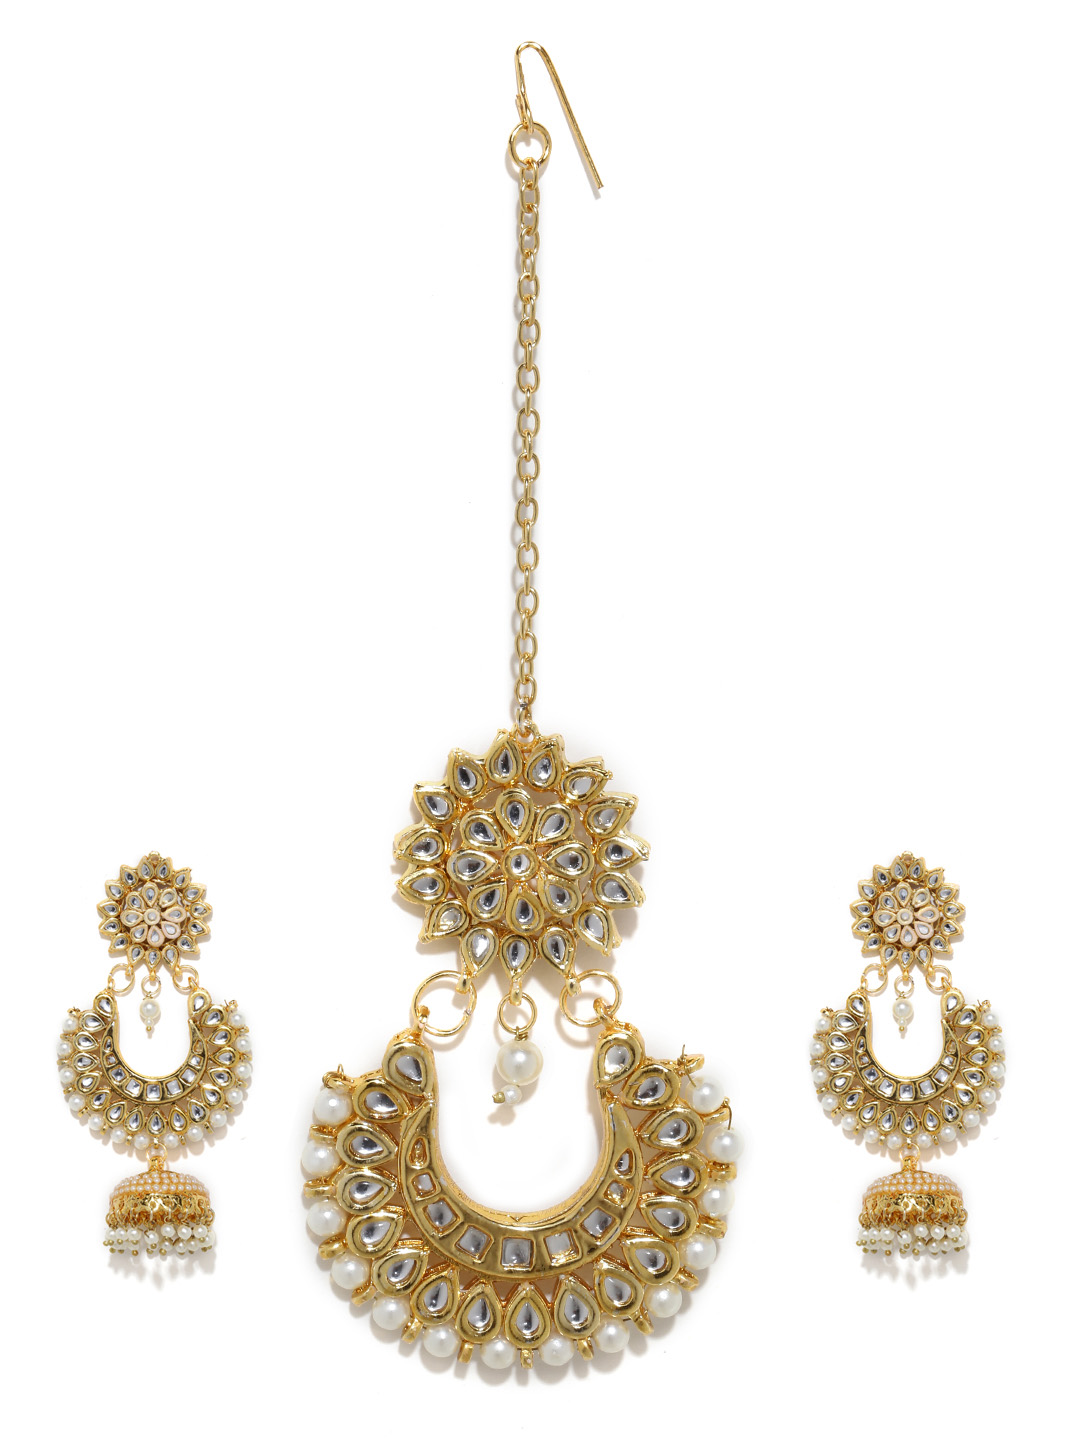 White Gold-Plated Stone-Studded Jewellery Set